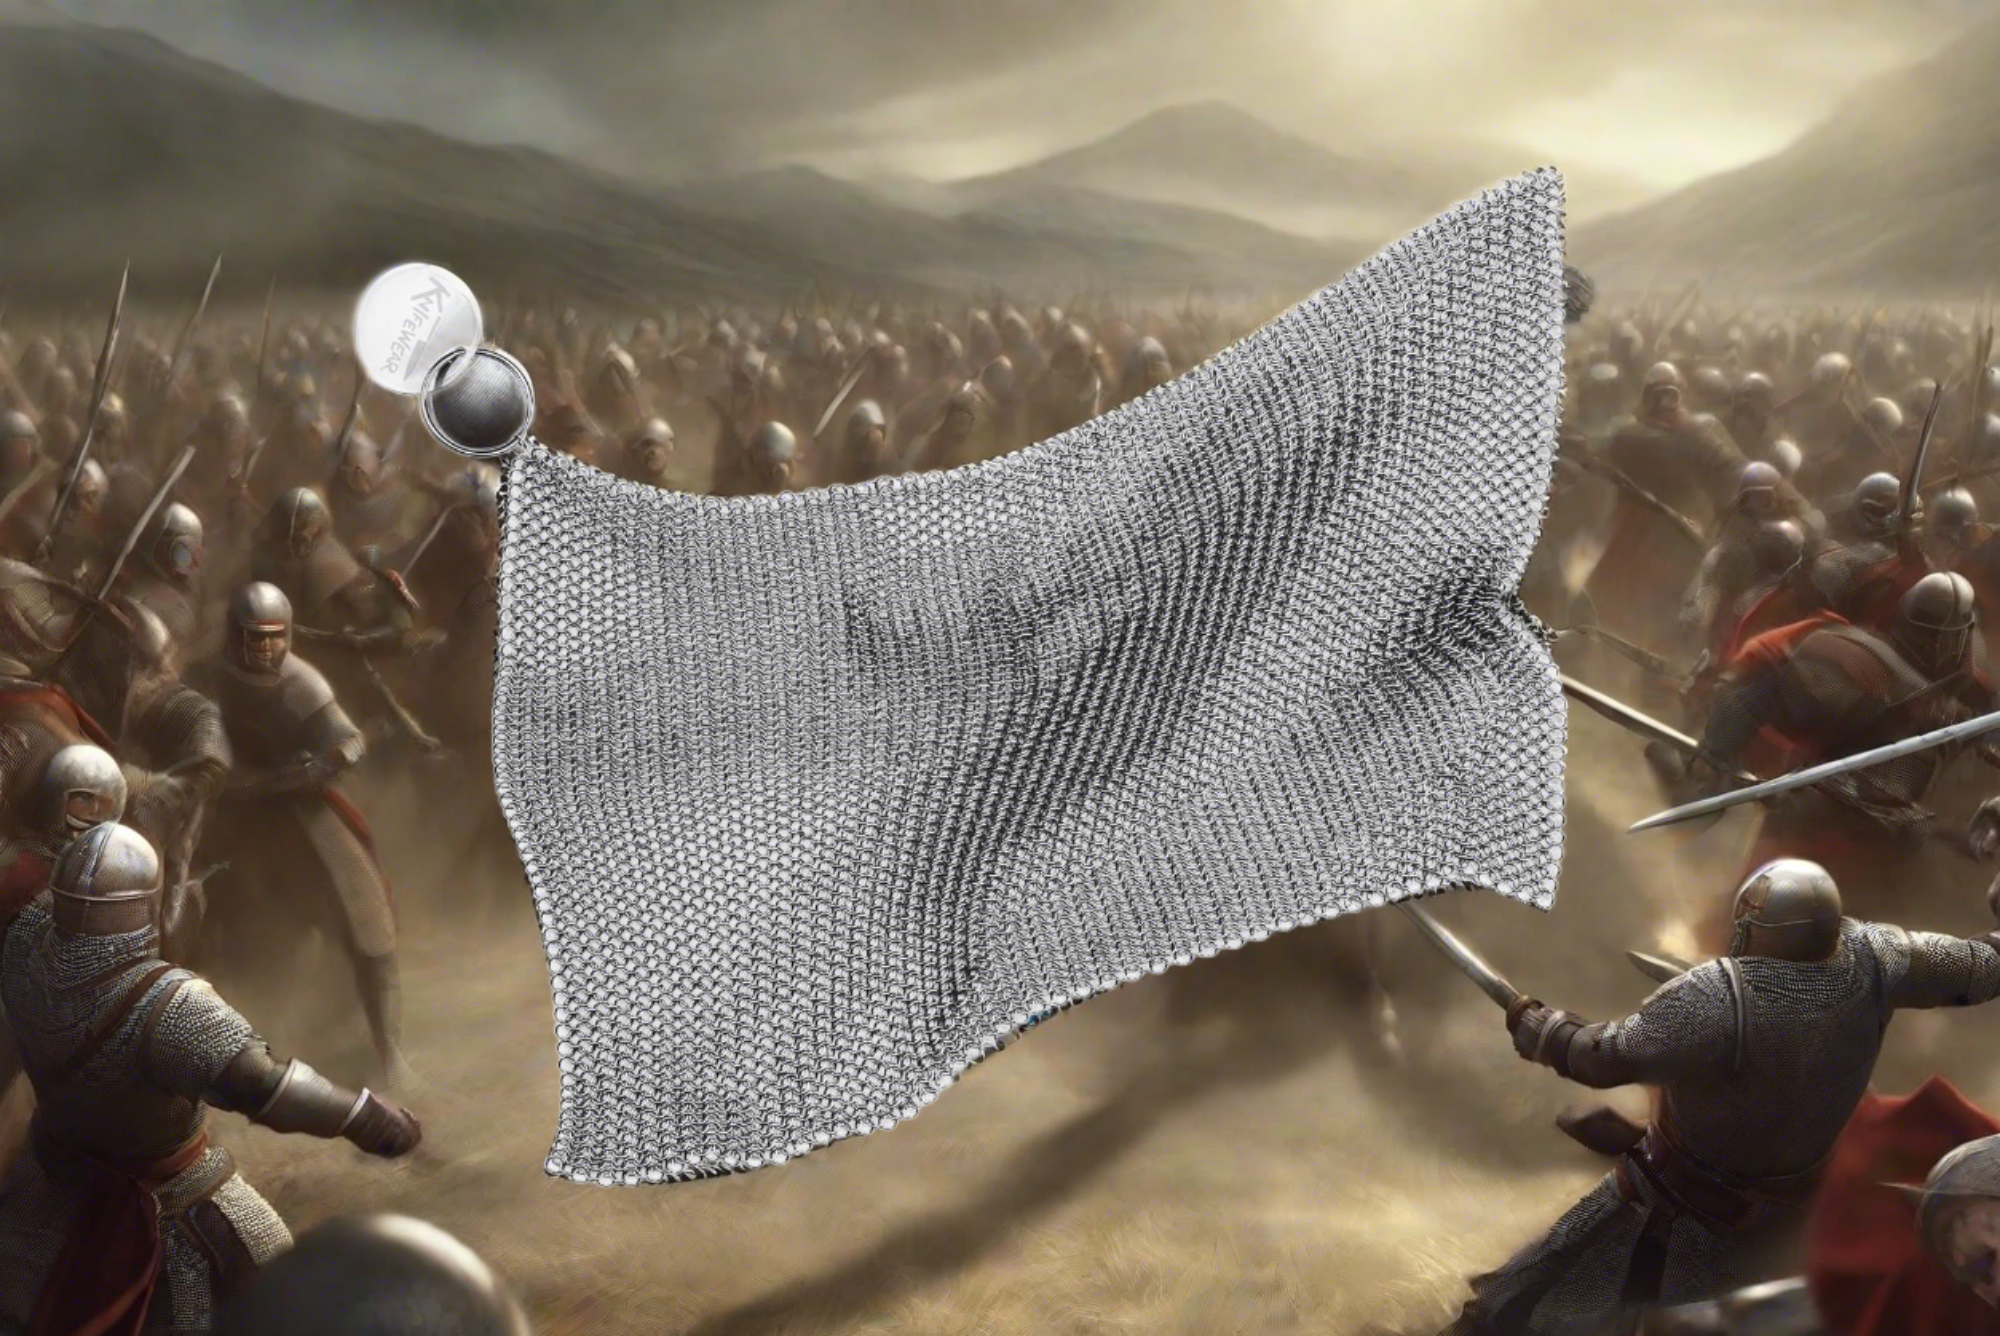 Sir Scrubs-A-Lot's Ye Olde Chainmail Pan Scrubber